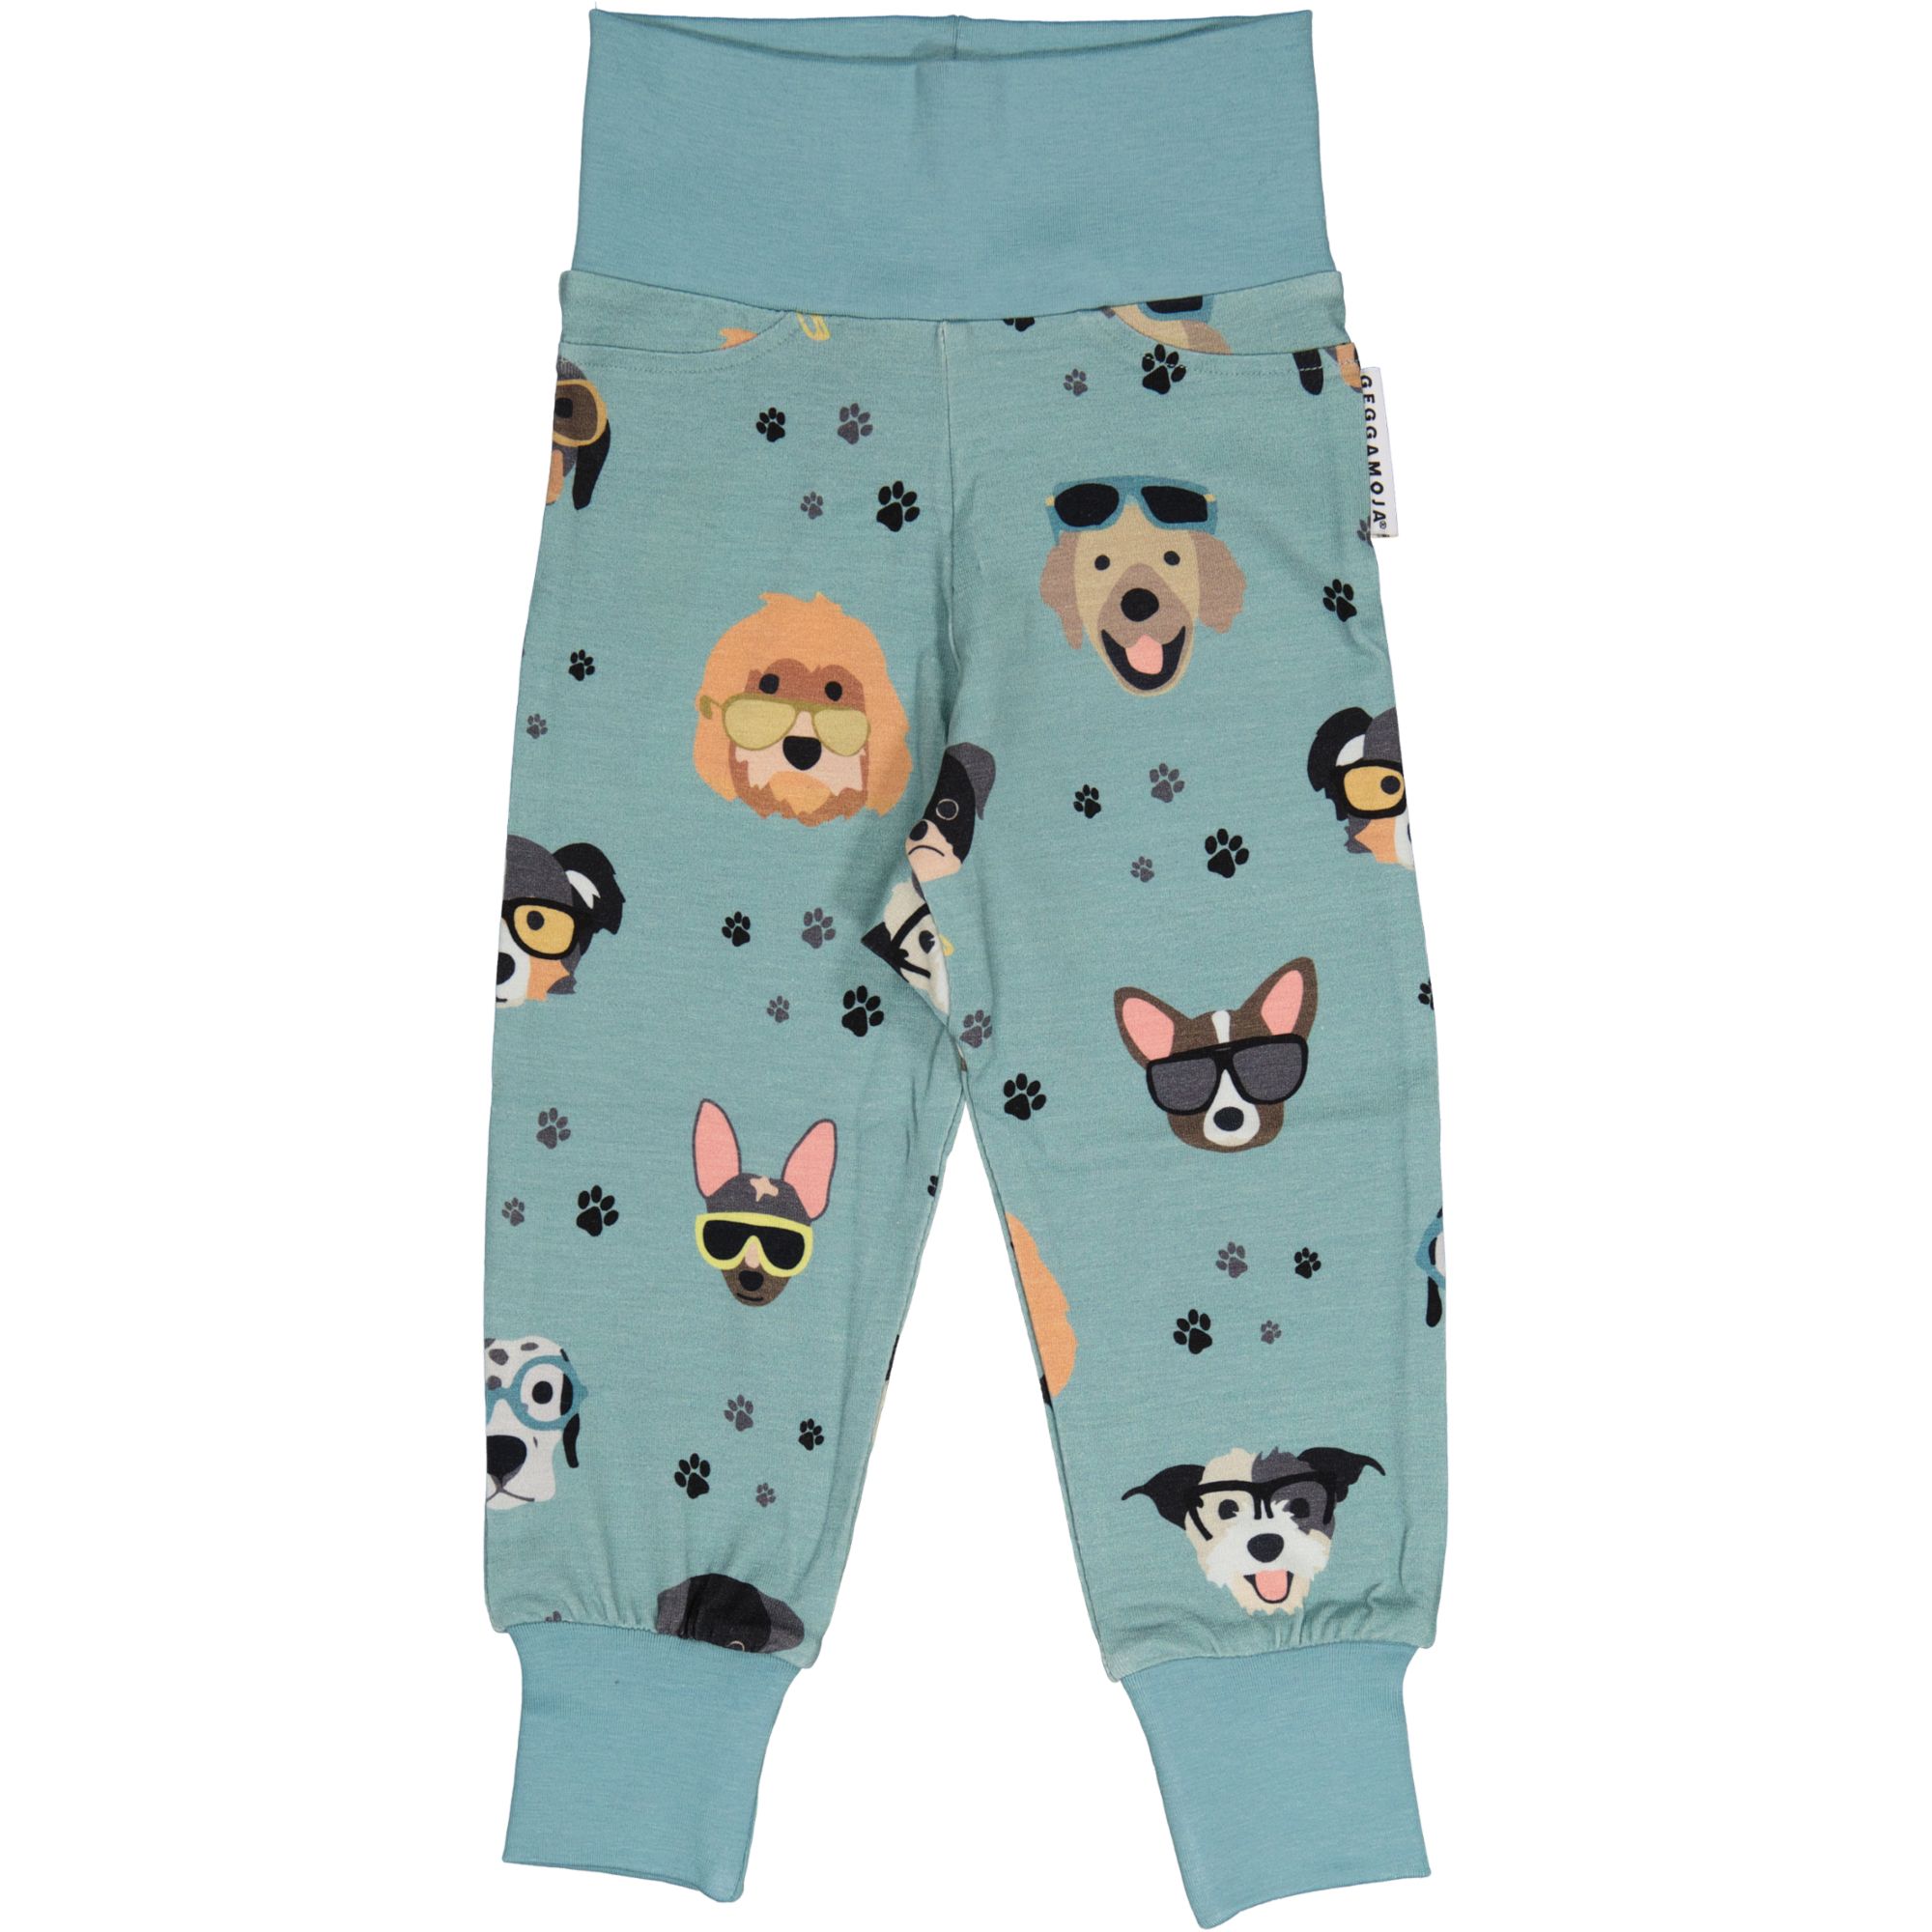 Bamboo baby pants Doggy cool